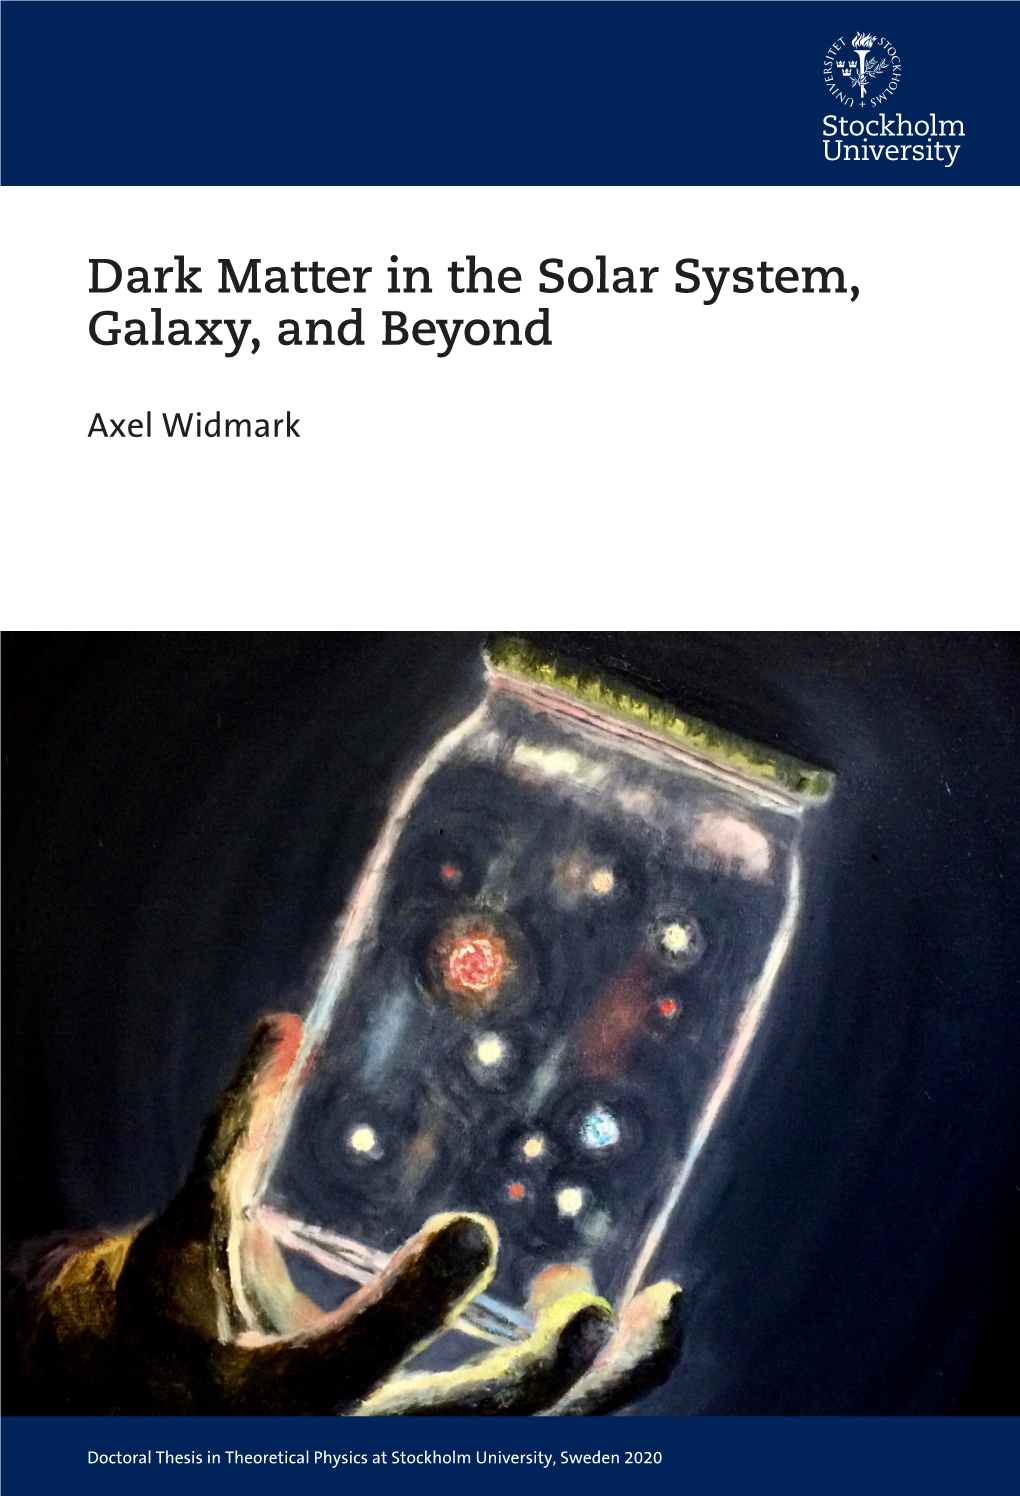 Dark Matter in the Solar System, Galaxy, and Beyond